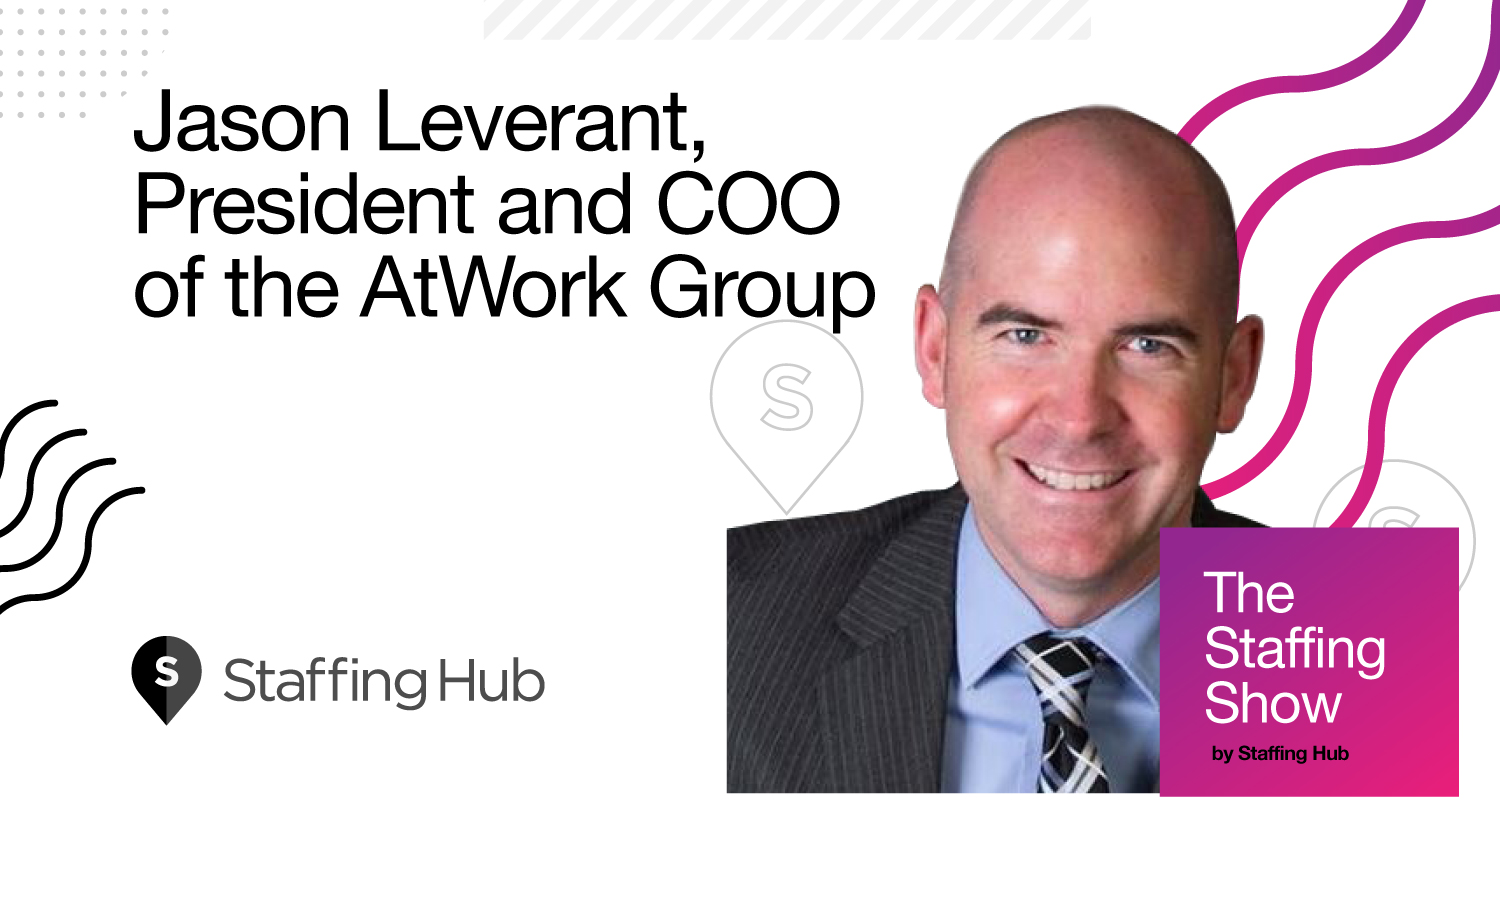 Jason Leverant, President and COO of the AtWork Group, on the Secret to His Consistent Double-Digit Growth